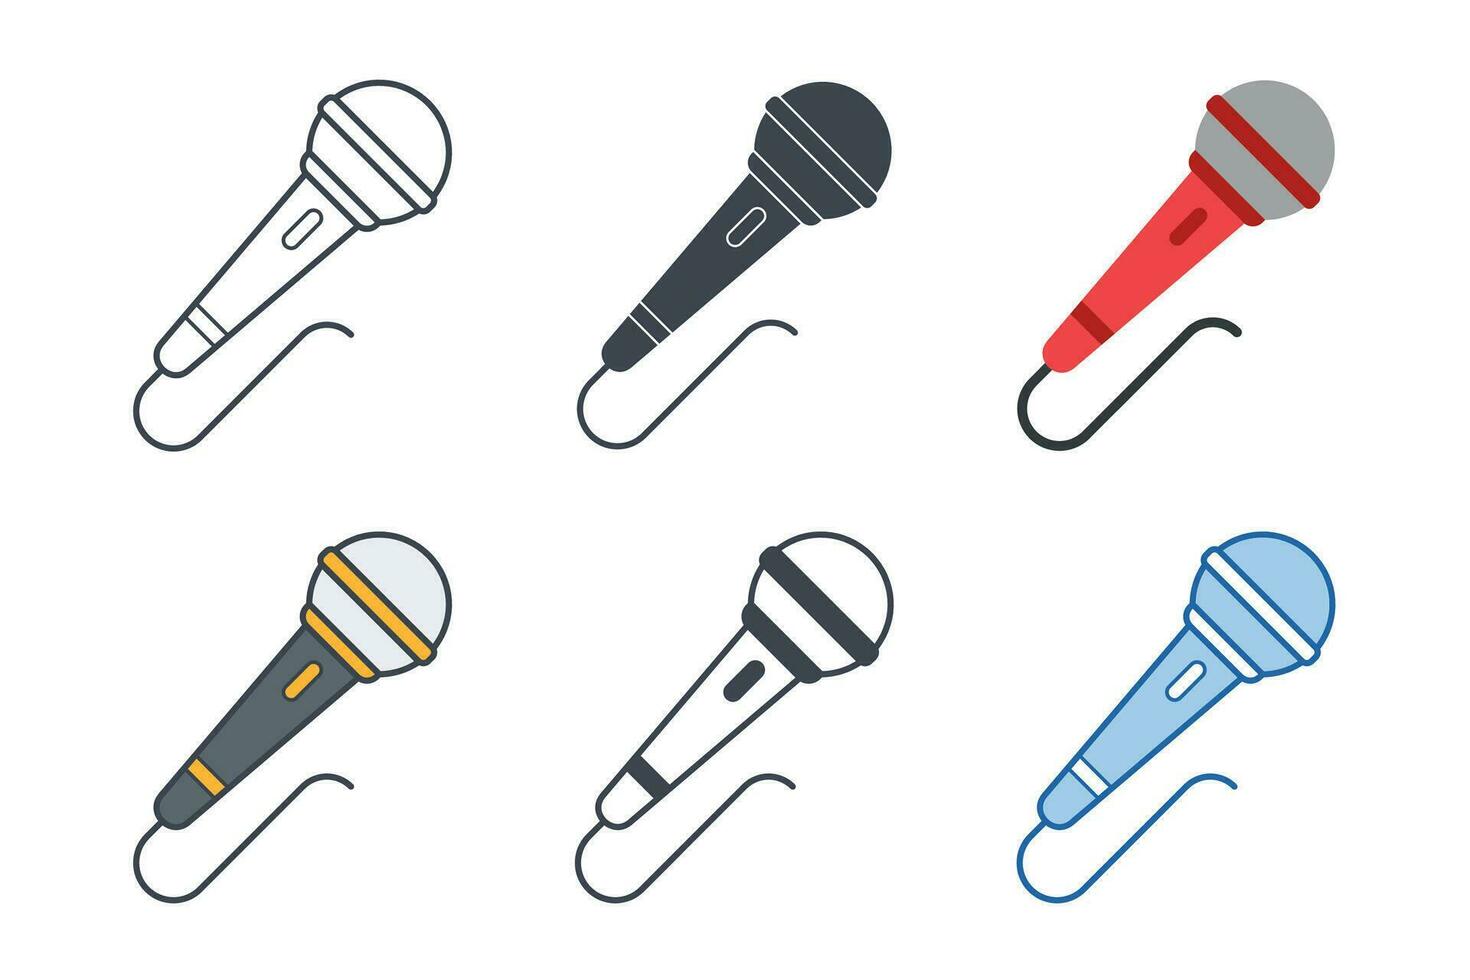 Microphone icon collection with different styles. Microphone icon symbol vector illustration isolated on white background